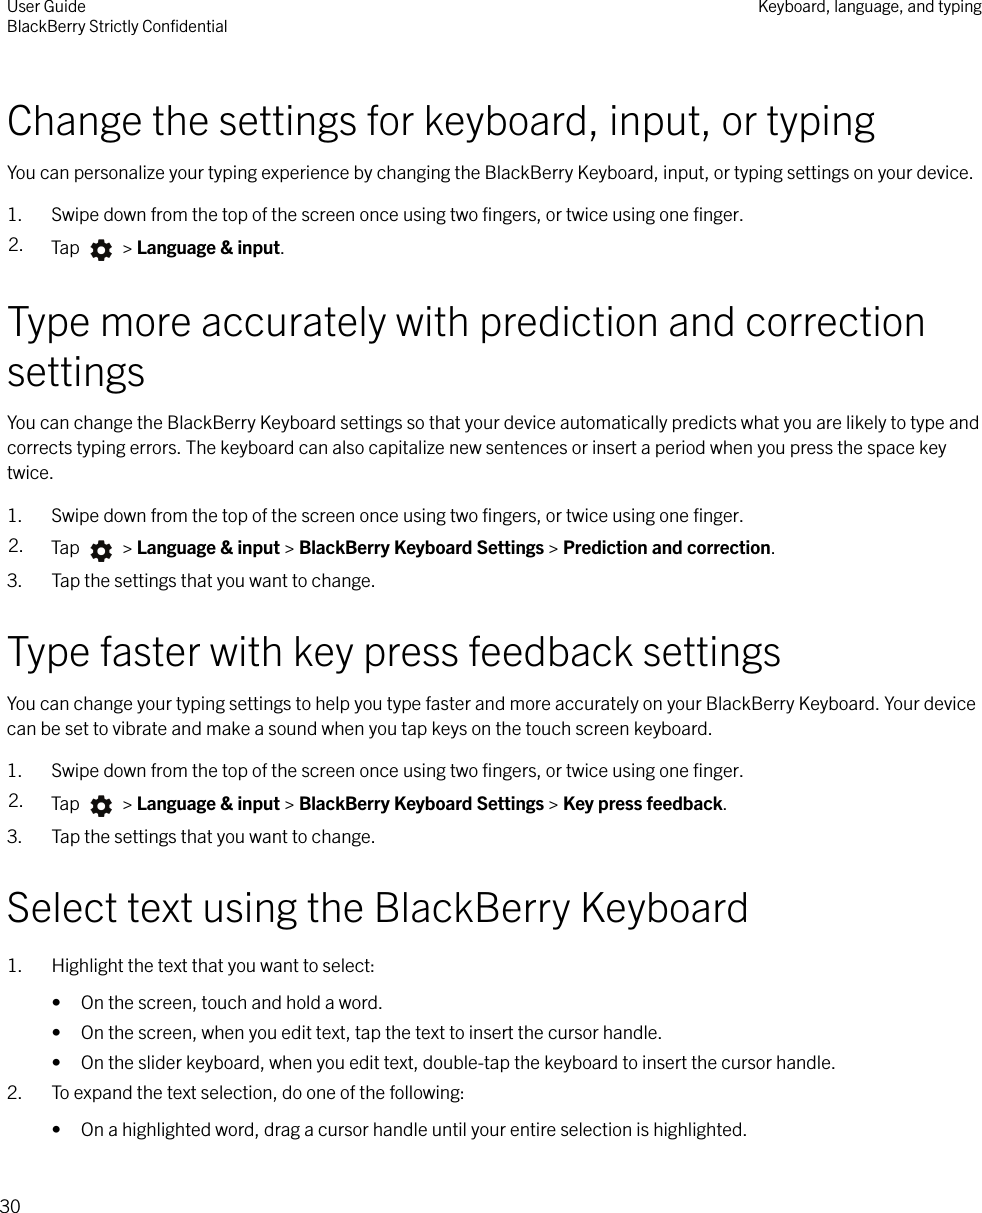 Change the settings for keyboard, input, or typingYou can personalize your typing experience by changing the BlackBerry Keyboard, input, or typing settings on your device.1. Swipe down from the top of the screen once using two ﬁngers, or twice using one ﬁnger.2. Tap   &gt; Language &amp; input.Type more accurately with prediction and correctionsettingsYou can change the BlackBerry Keyboard settings so that your device automatically predicts what you are likely to type andcorrects typing errors. The keyboard can also capitalize new sentences or insert a period when you press the space keytwice.1. Swipe down from the top of the screen once using two ﬁngers, or twice using one ﬁnger.2. Tap   &gt; Language &amp; input &gt; BlackBerry Keyboard Settings &gt; Prediction and correction.3. Tap the settings that you want to change.Type faster with key press feedback settingsYou can change your typing settings to help you type faster and more accurately on your BlackBerry Keyboard. Your devicecan be set to vibrate and make a sound when you tap keys on the touch screen keyboard.1. Swipe down from the top of the screen once using two ﬁngers, or twice using one ﬁnger.2. Tap   &gt; Language &amp; input &gt; BlackBerry Keyboard Settings &gt; Key press feedback.3. Tap the settings that you want to change.Select text using the BlackBerry Keyboard1. Highlight the text that you want to select:• On the screen, touch and hold a word.• On the screen, when you edit text, tap the text to insert the cursor handle.• On the slider keyboard, when you edit text, double-tap the keyboard to insert the cursor handle.2. To expand the text selection, do one of the following:• On a highlighted word, drag a cursor handle until your entire selection is highlighted.User GuideBlackBerry Strictly ConﬁdentialKeyboard, language, and typing30